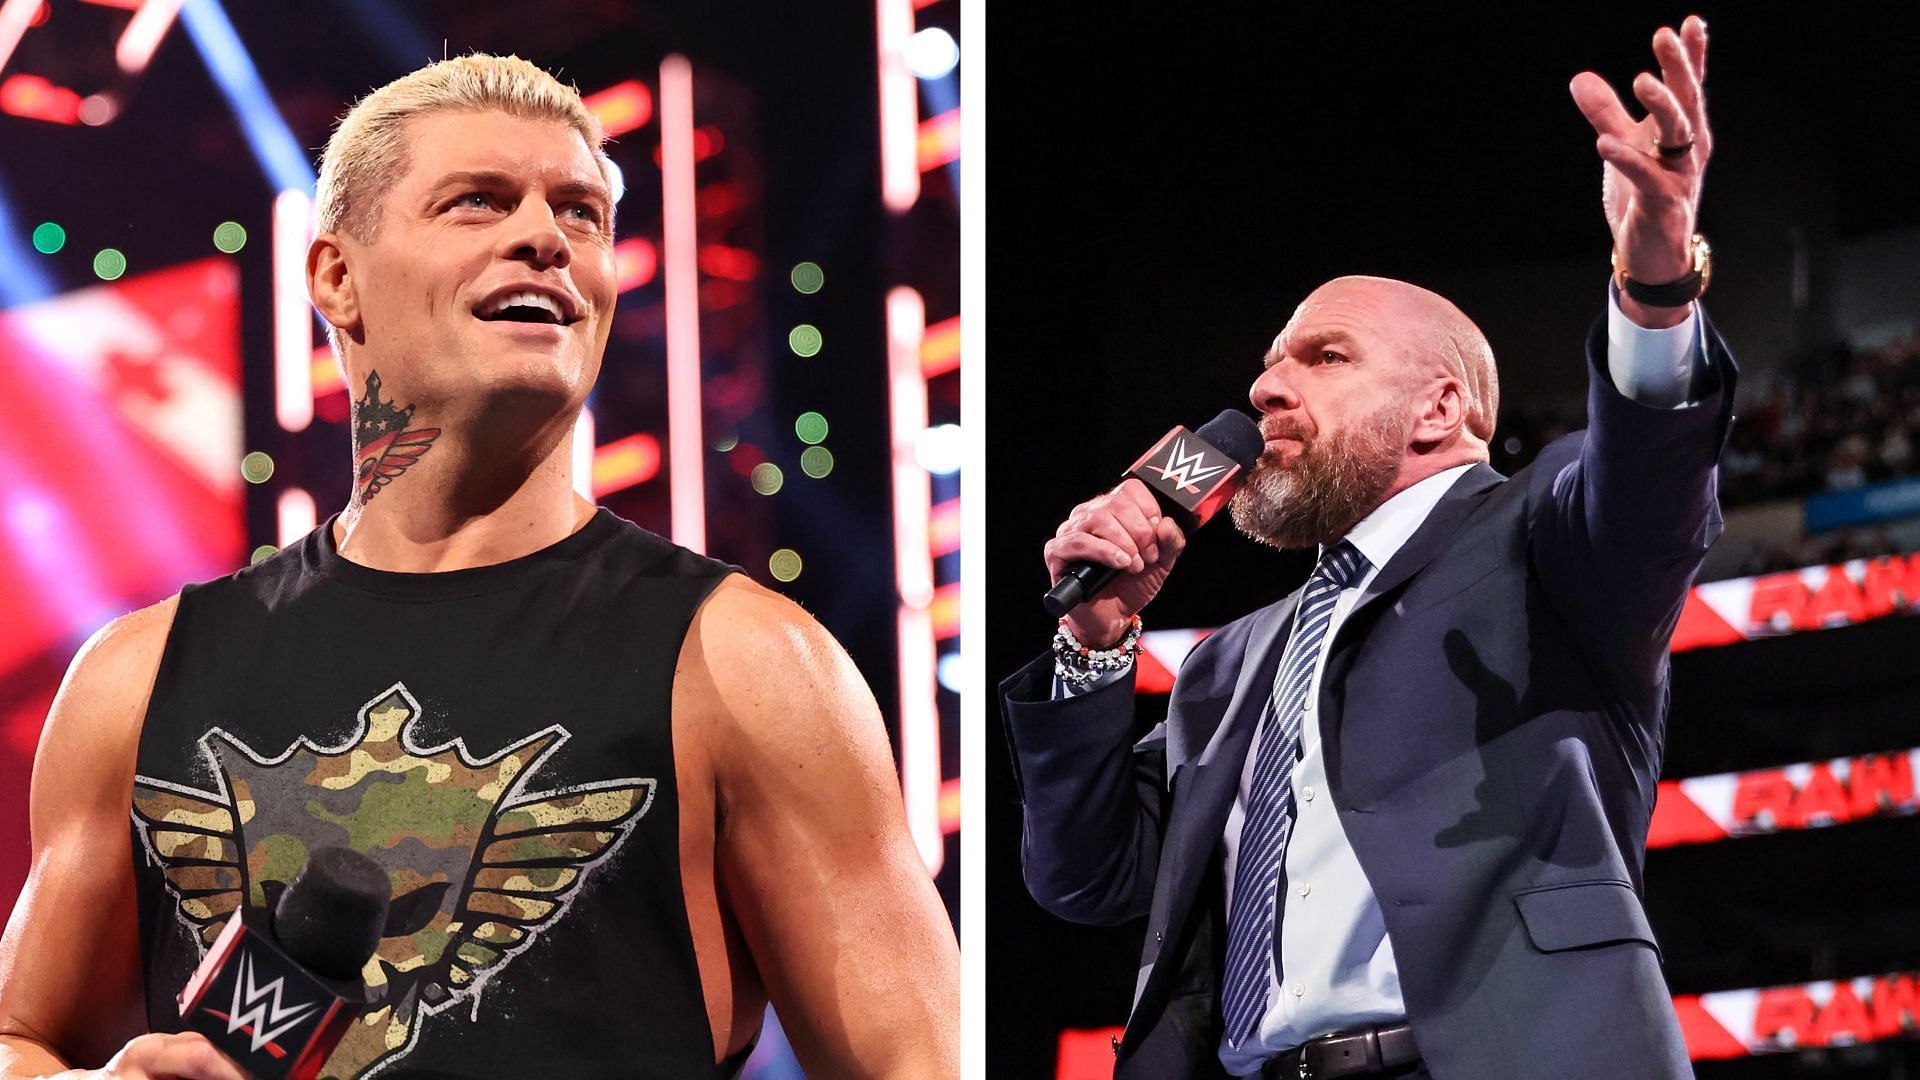 12 full-length shows are coming to WWE Network &amp; Peacock this weekend